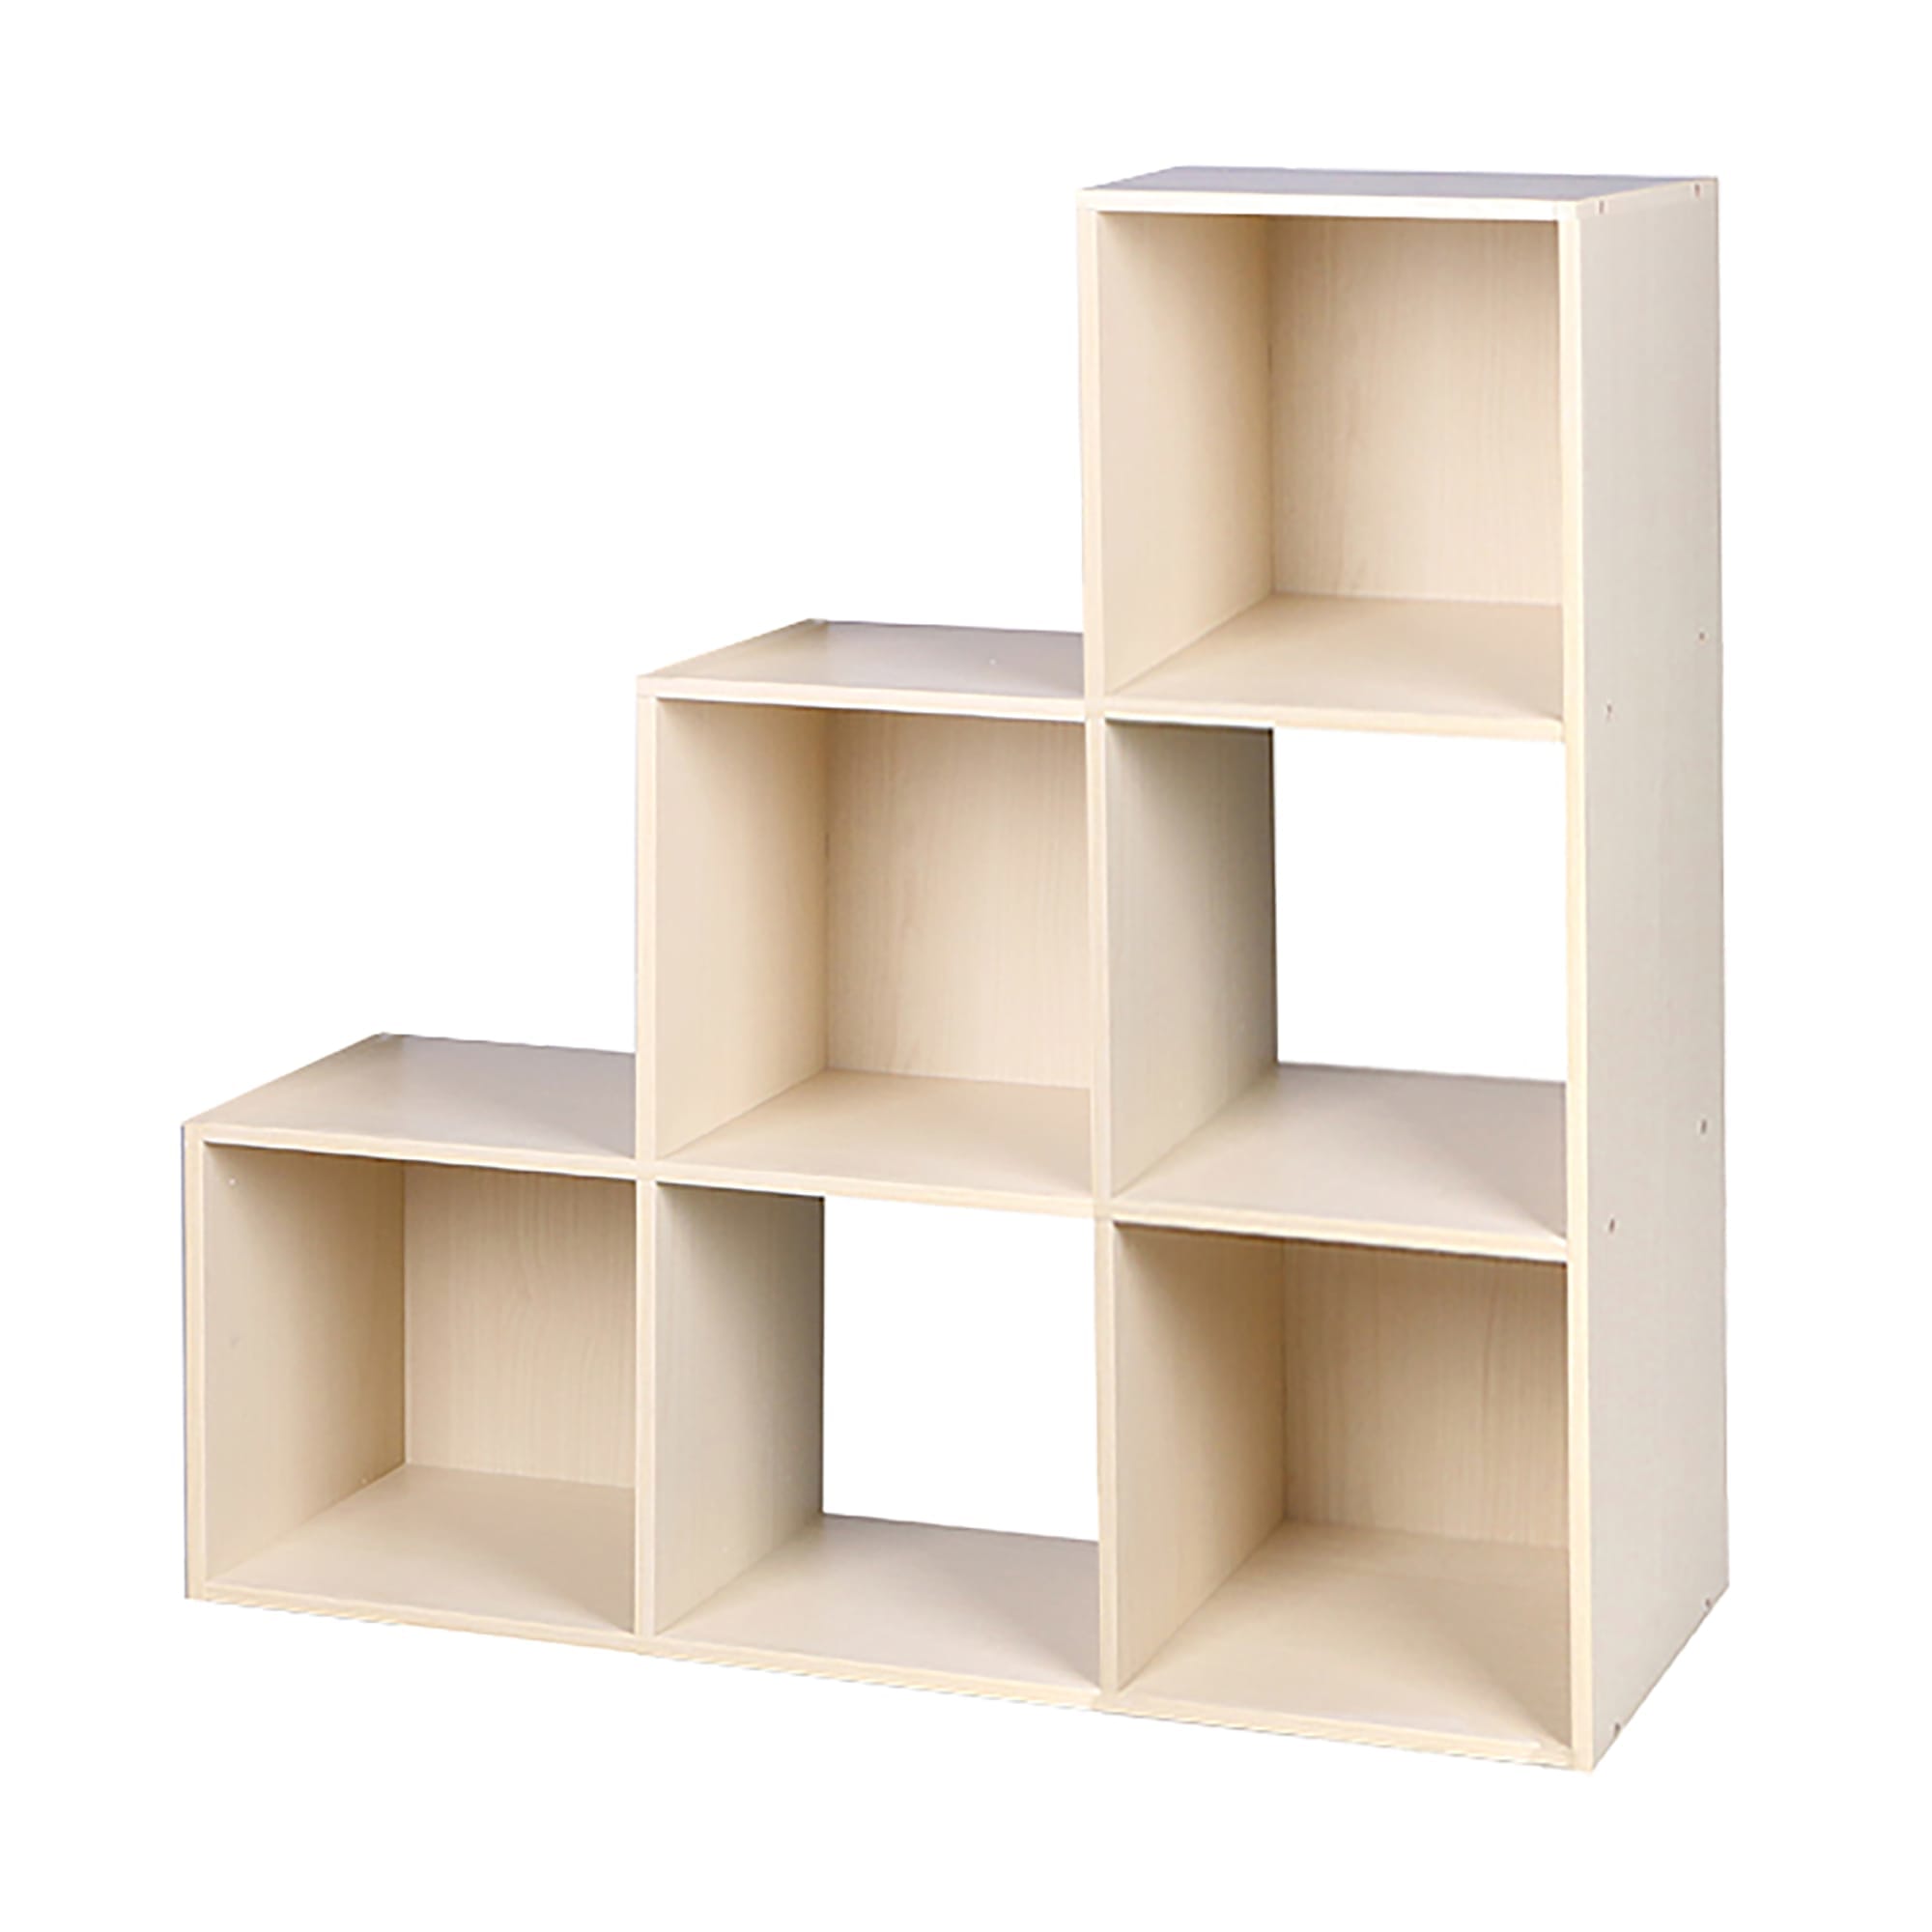 Home Basics Open and Enclosed Tiered 6 Cube MDF Storage Organizer, Oak $40.00 EACH, CASE PACK OF 1